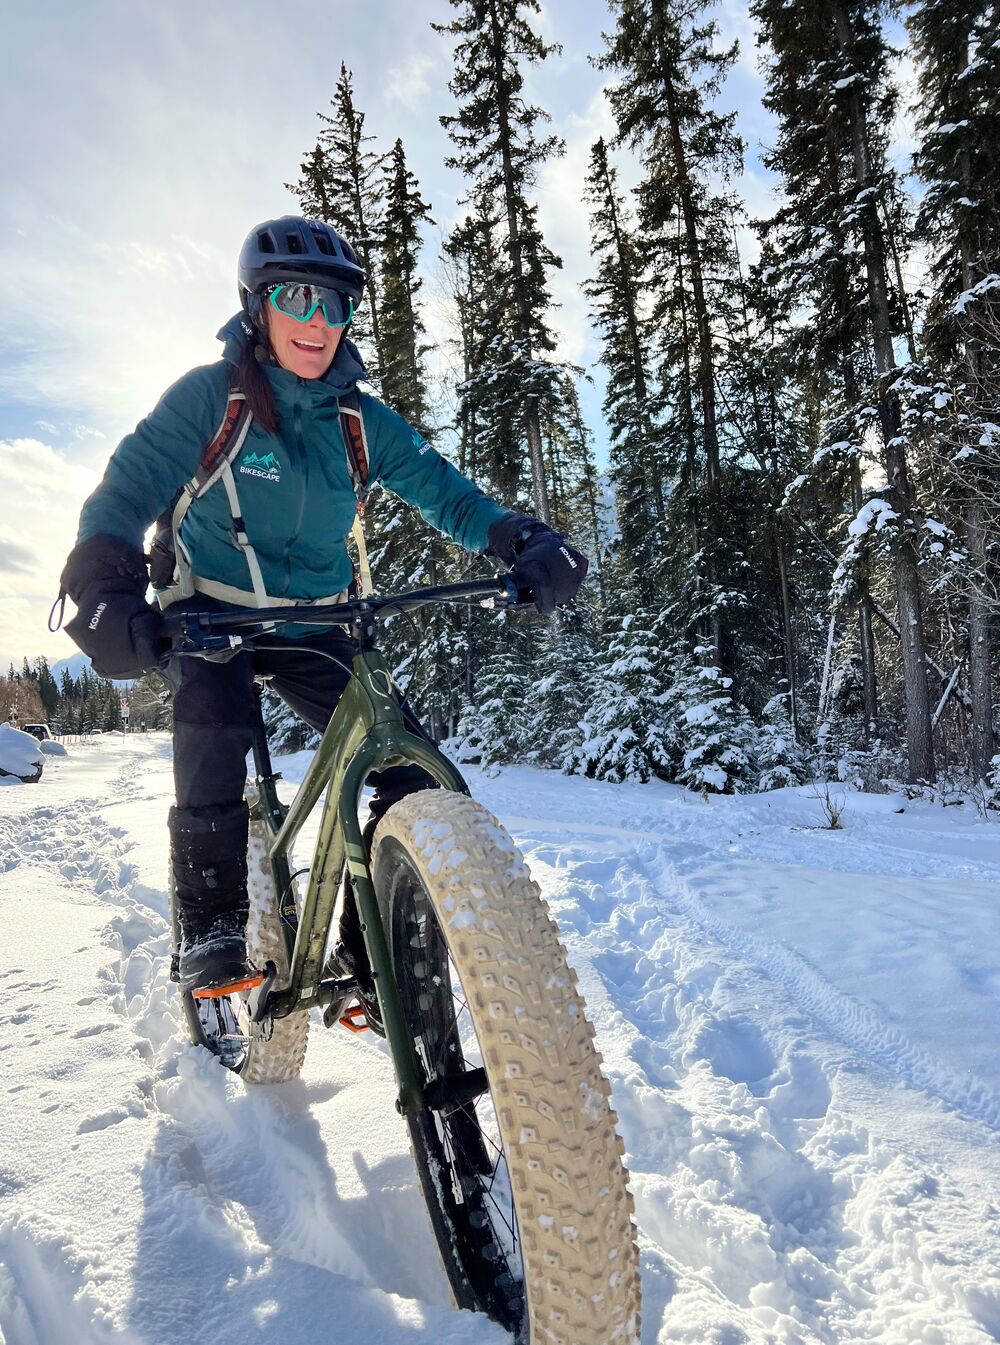 A fat biker rides in the snow through trees in Banff National Park.